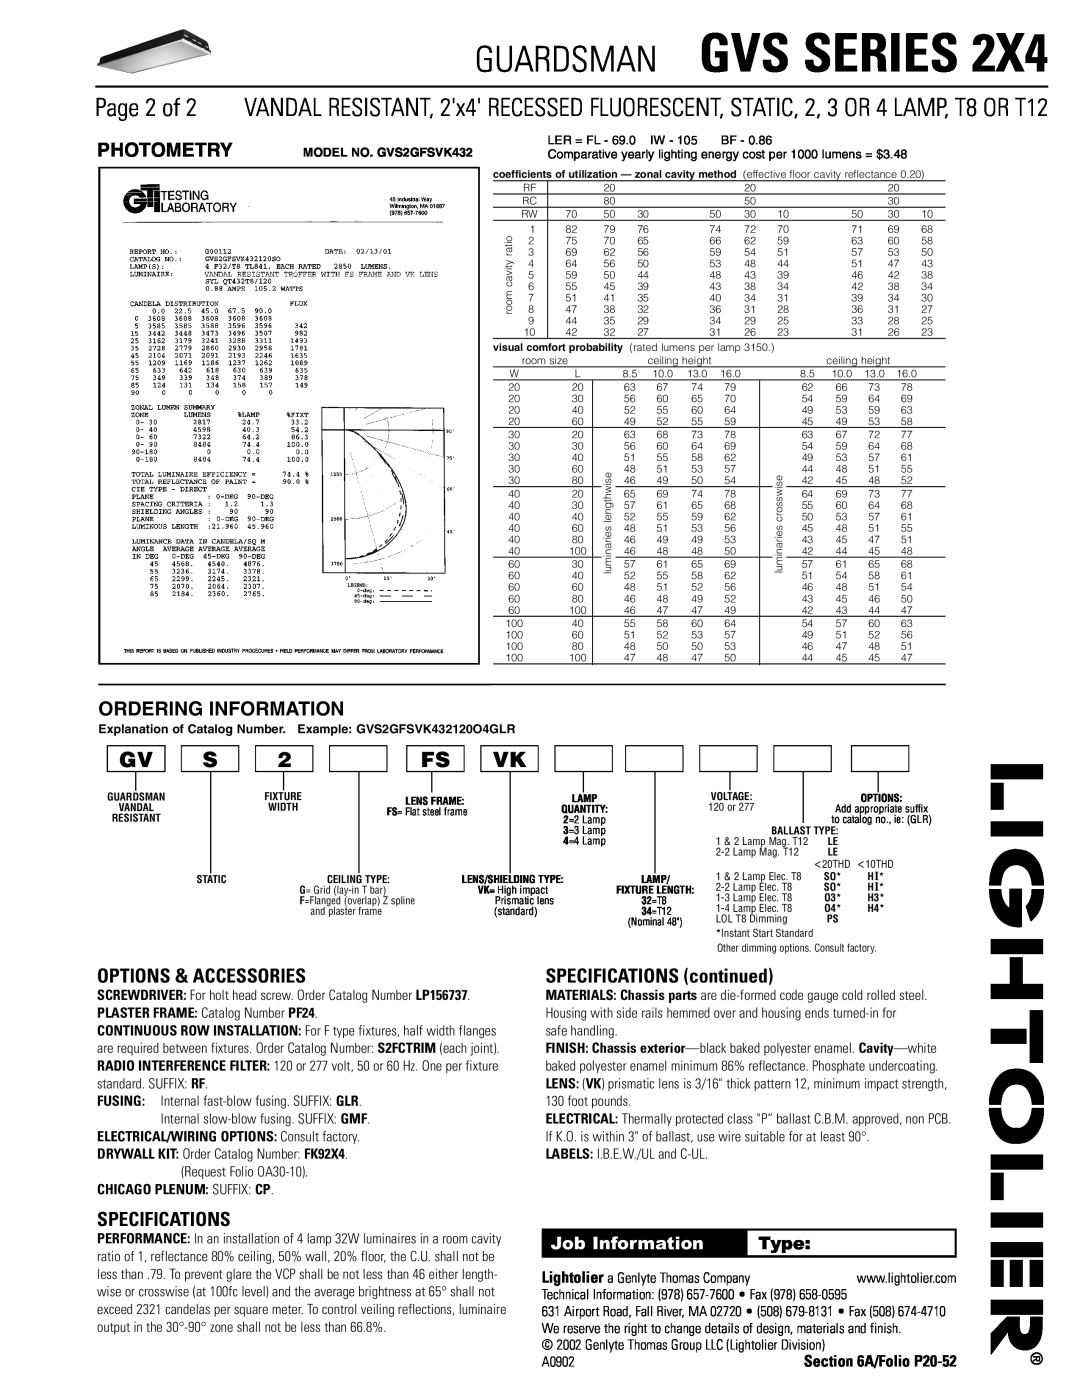 Lightolier GVS Series 2X4 Photometry, Ordering Information, Options & Accessories, Specifications, Guardsman Gvs Series 